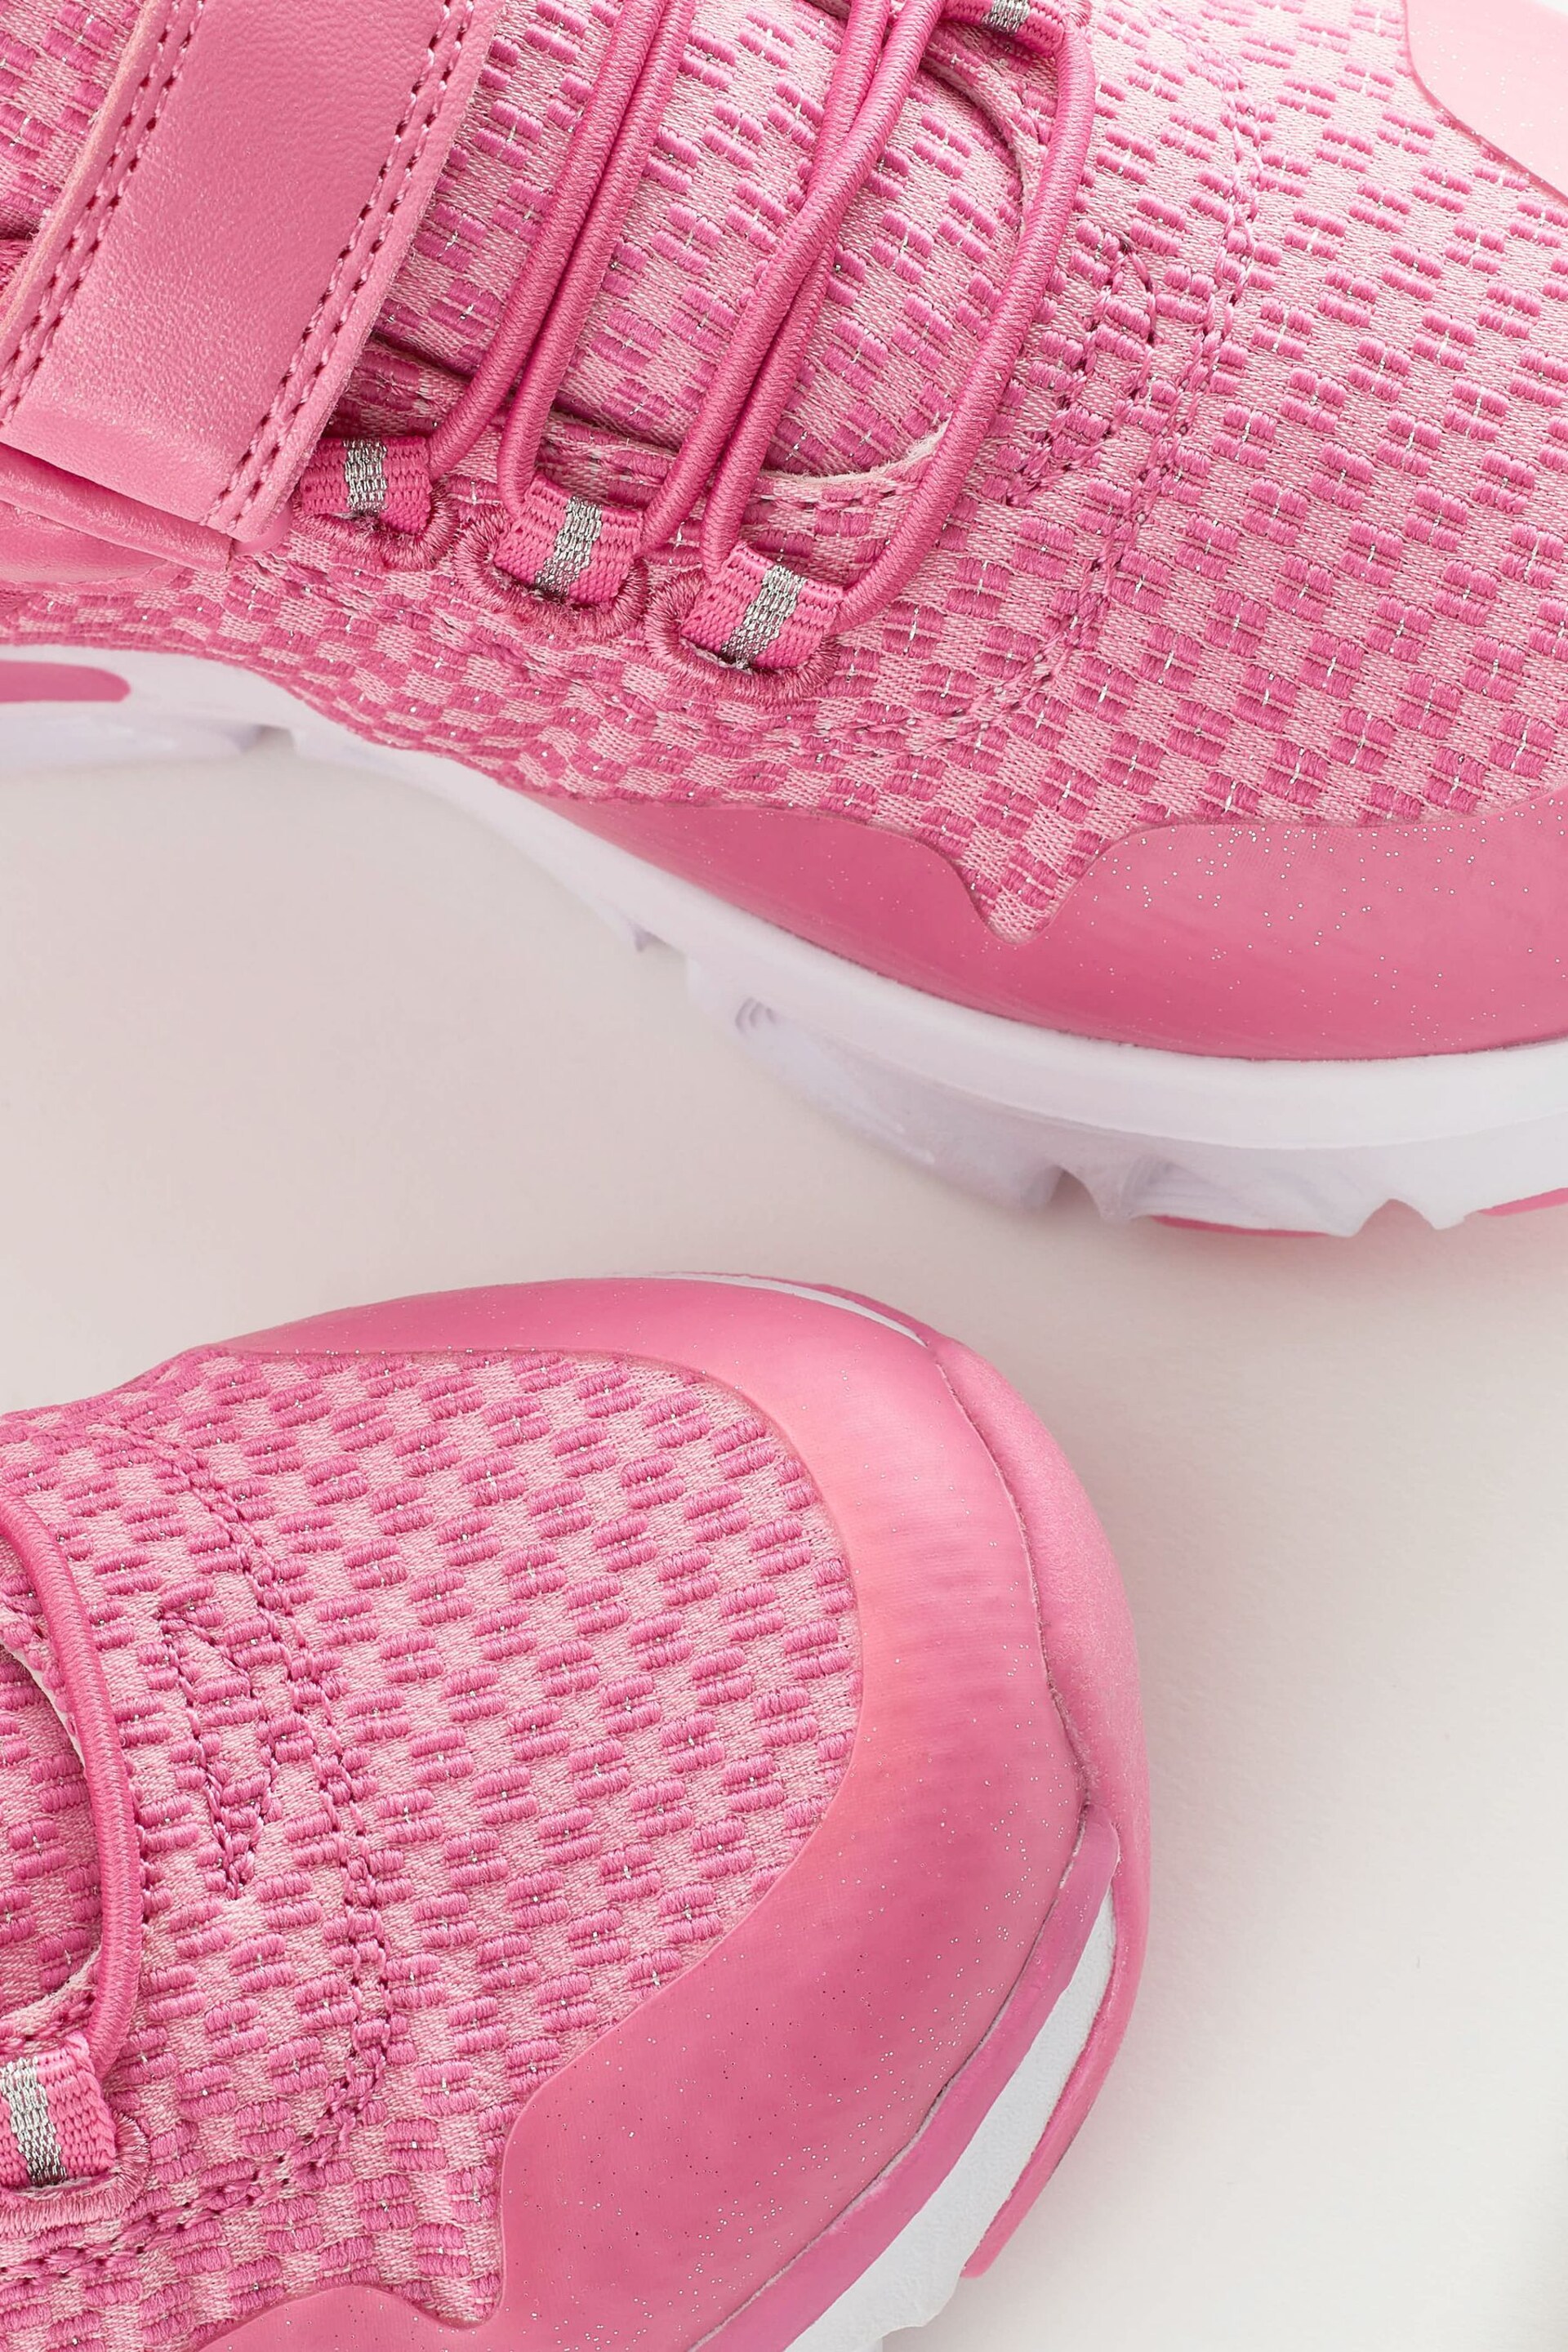 Pink Sports Trainers - Image 5 of 6